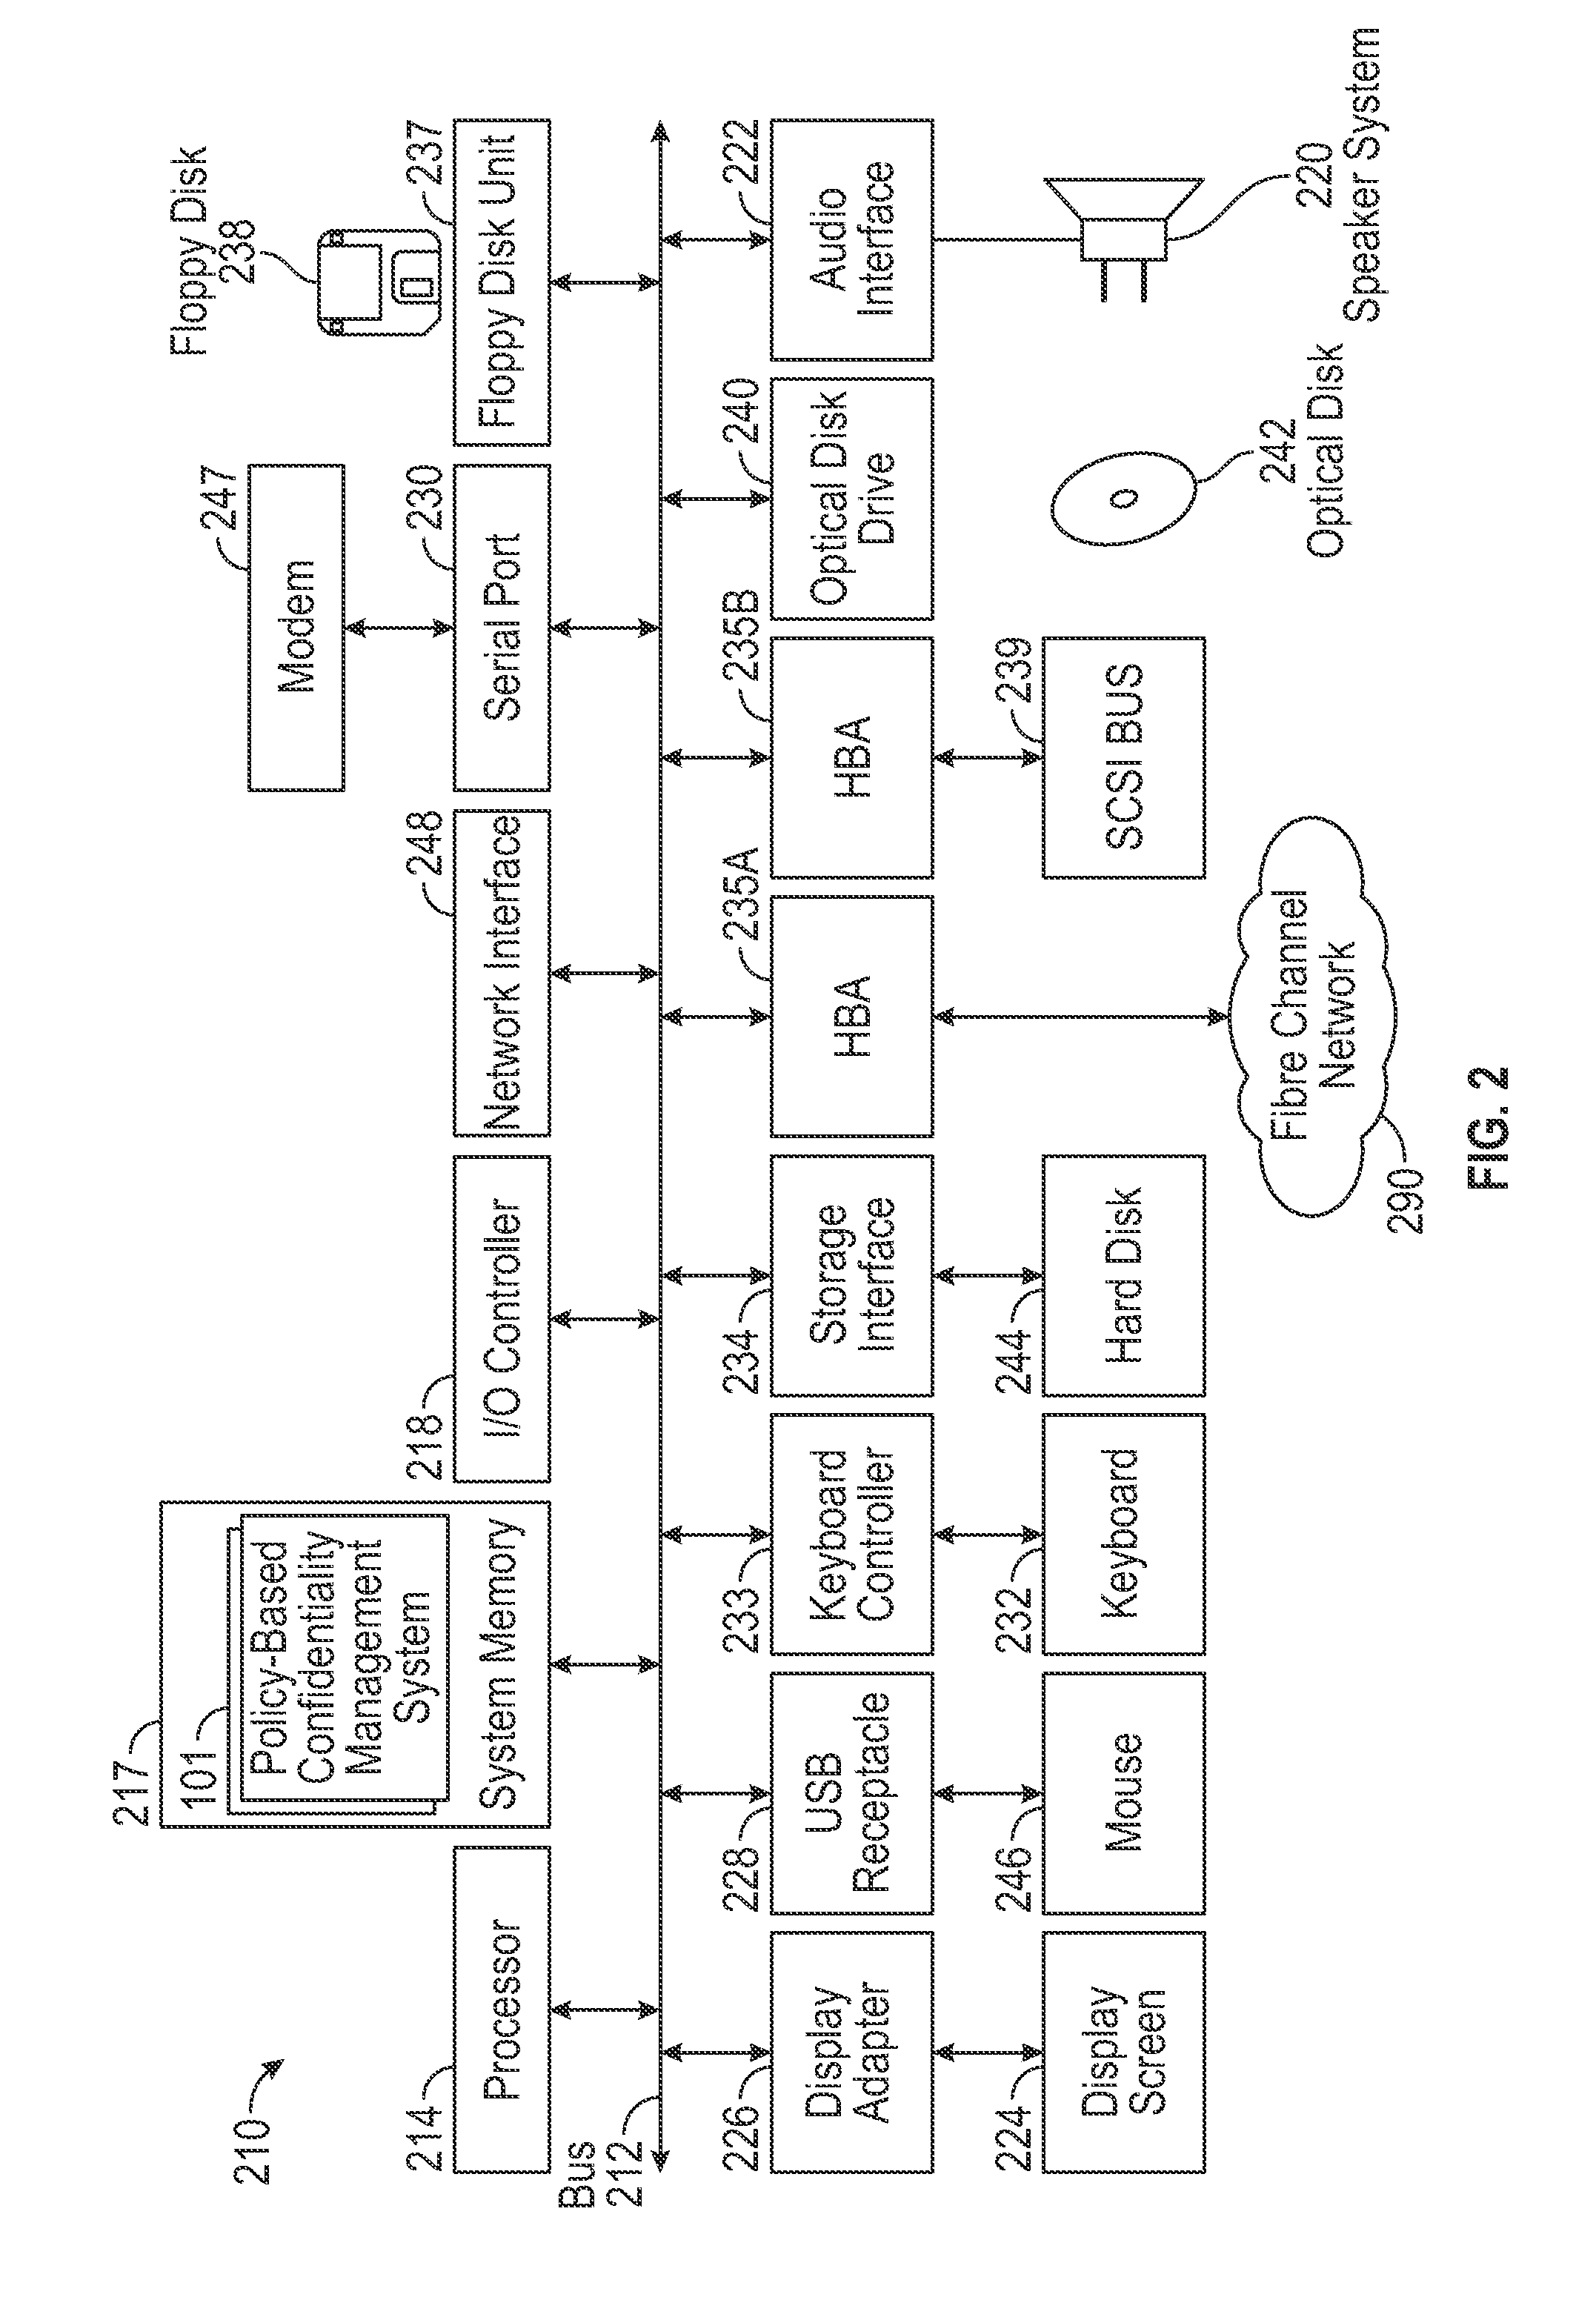 System and Method for Policy-Based Confidentiality Management